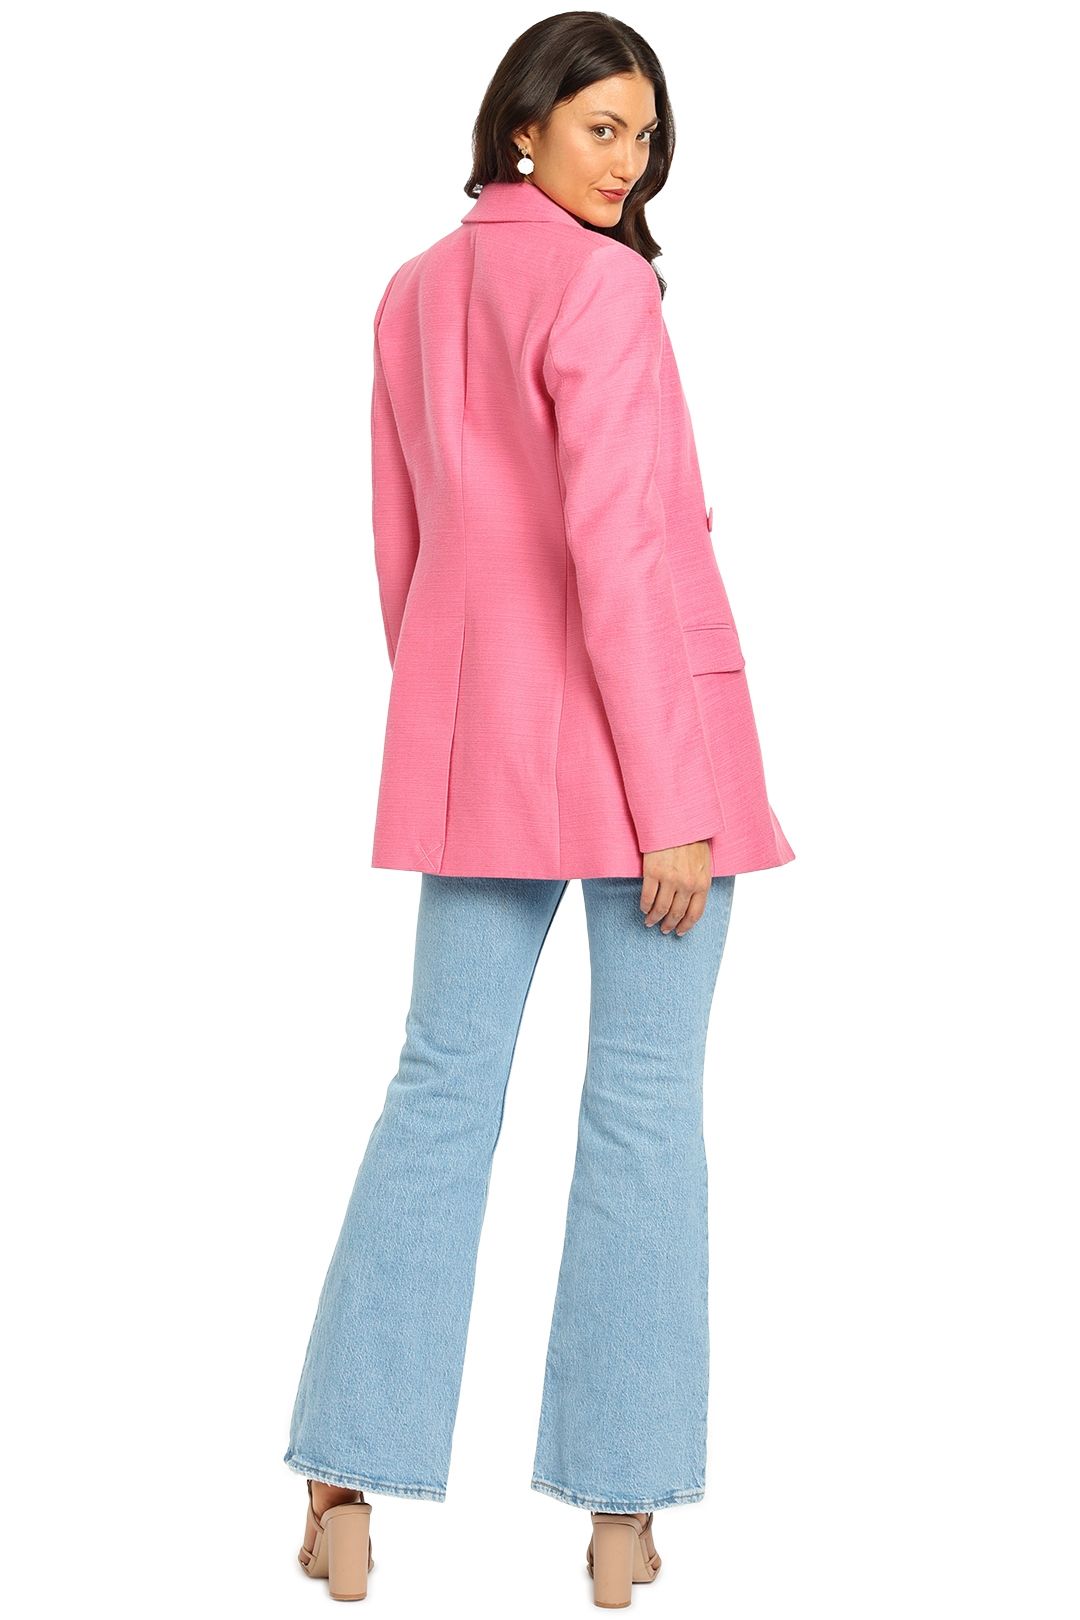 Camilla and Marc Claudia Fitted Jacket Long Sleeves